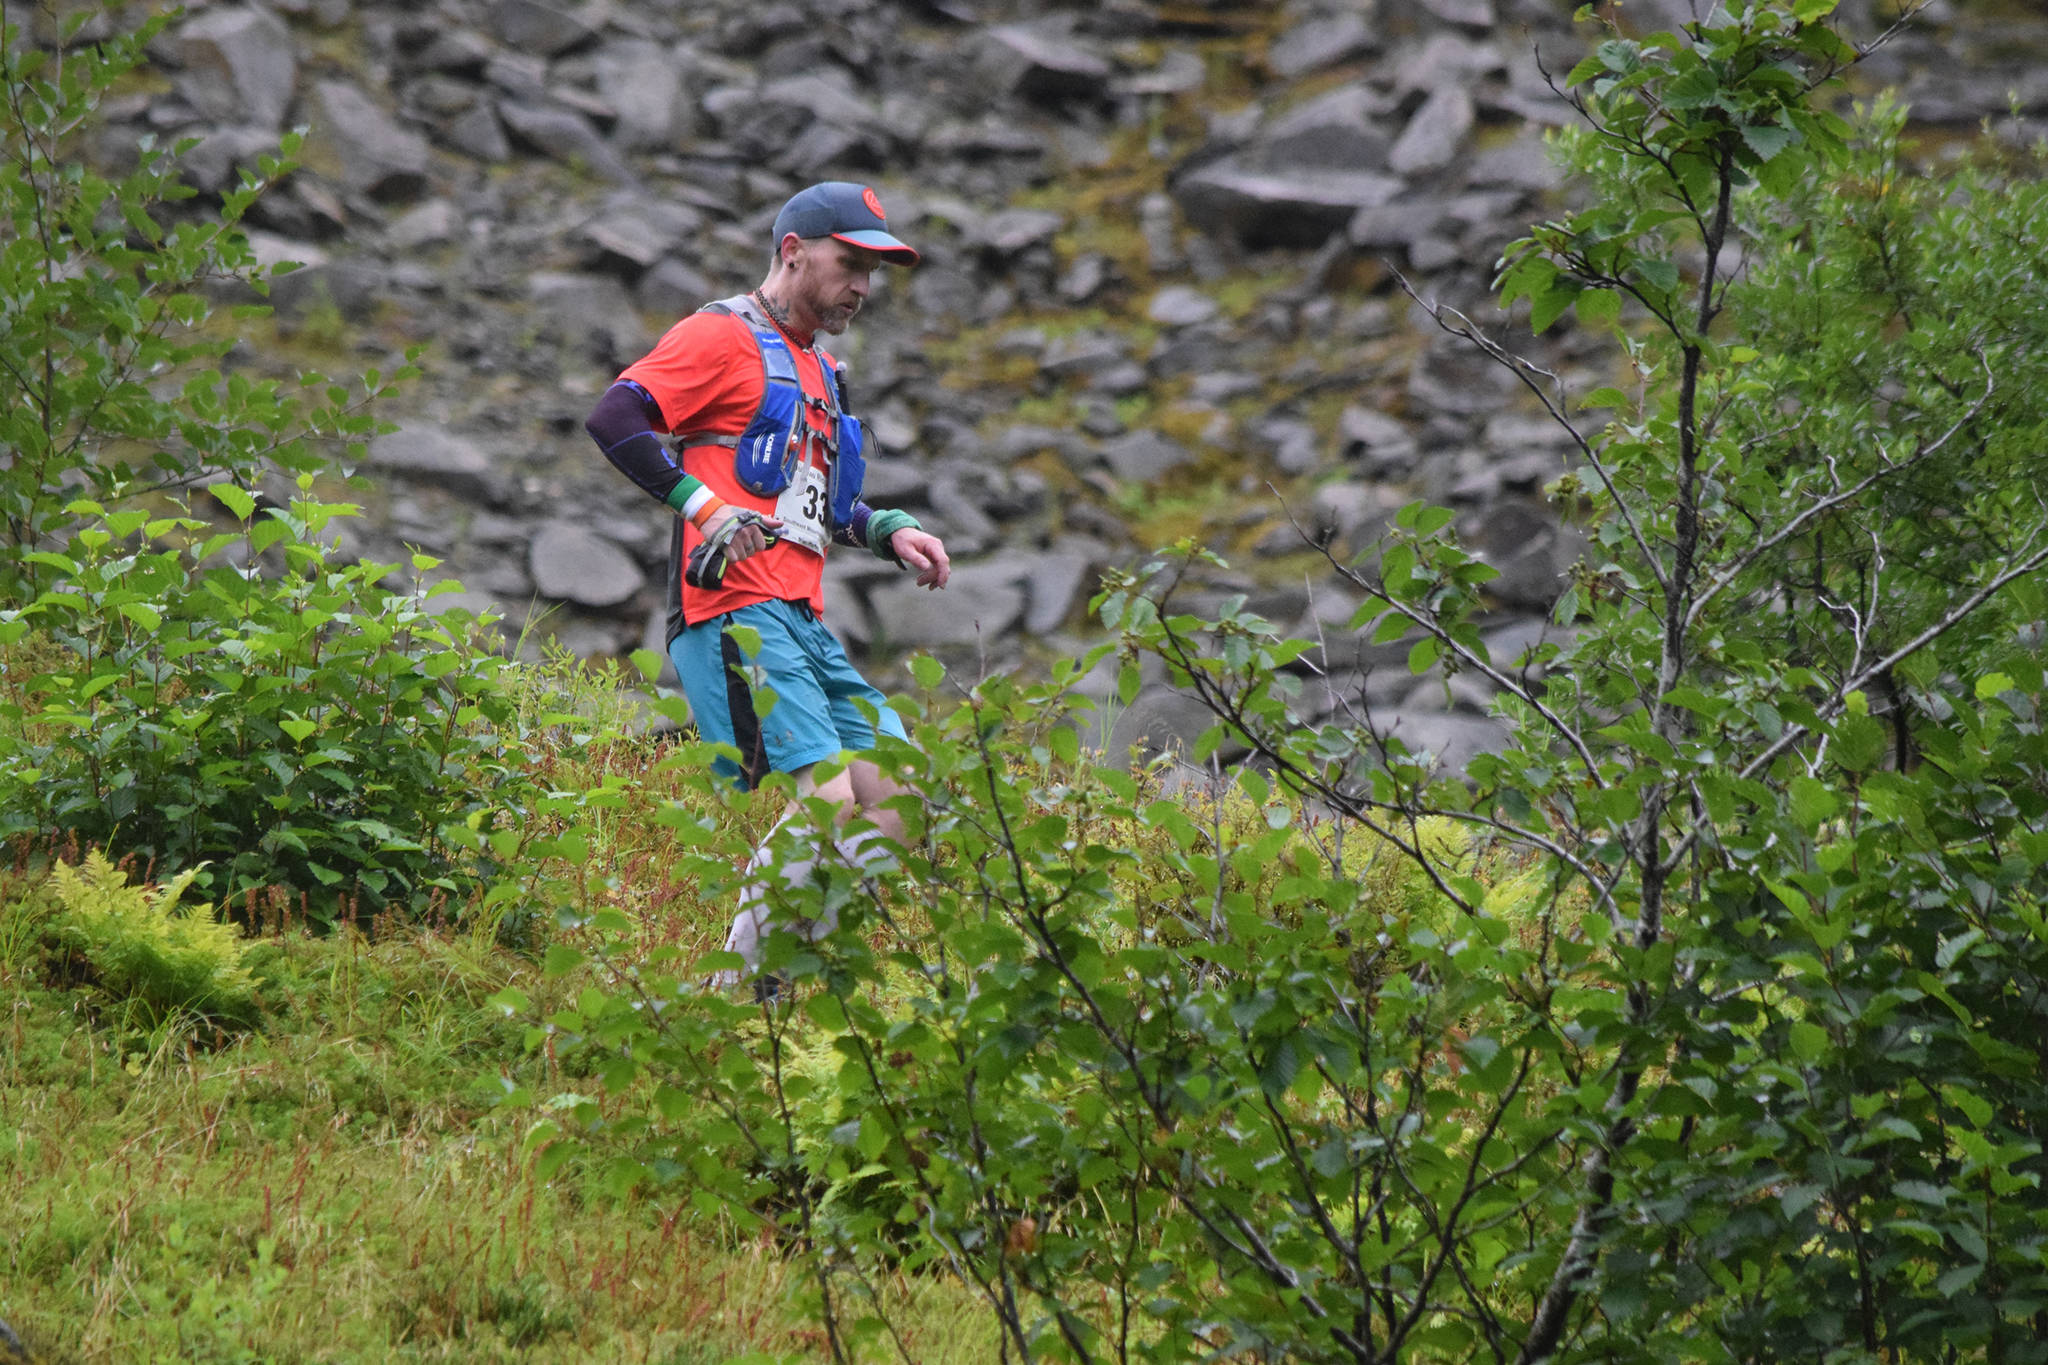 Brian Murphy descends from Mount Juneau along the Granite Creek Trail while competing in the Juneau Ridge Race on Saturday, July 20, 2019. Over 60 runners participated in the 15-mile mountain running race that featured approximately 5,000 feet of elevation gain. (Nolin Ainsworth | Juneau Empire)